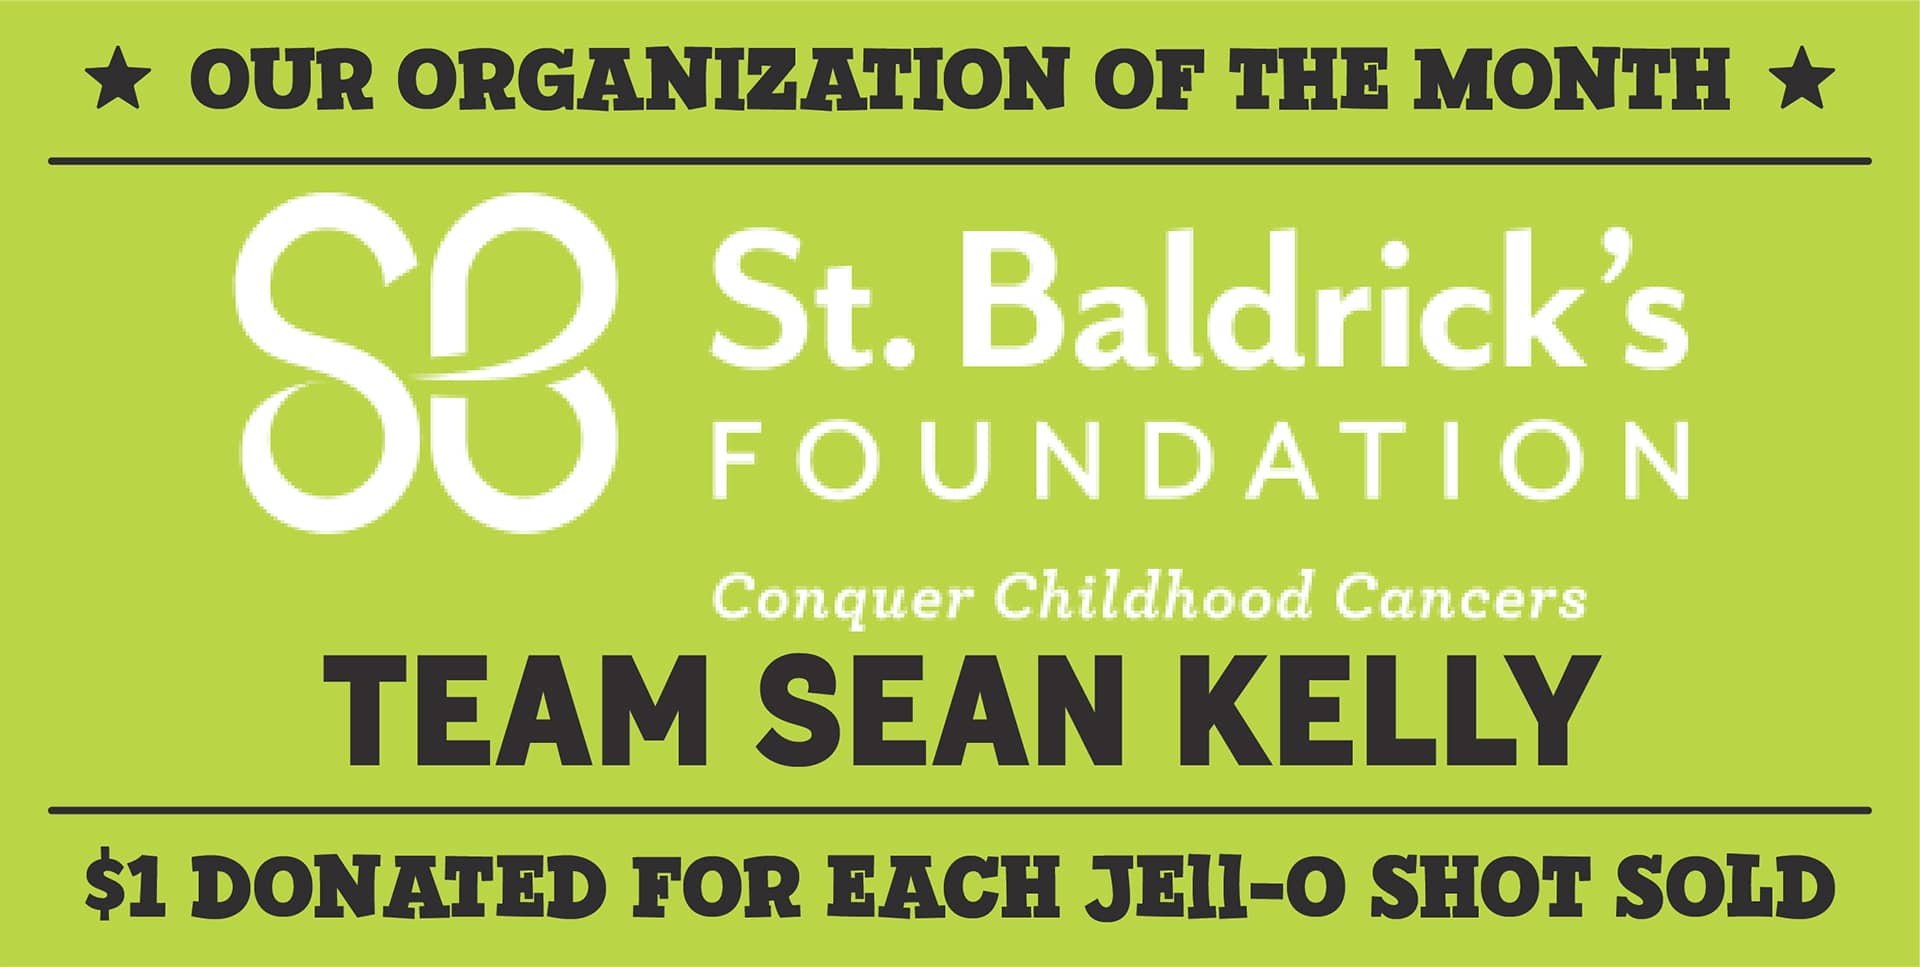 Poster for St. Baldrick's Foundation Team Sean Kelly, March's Organization of the Month